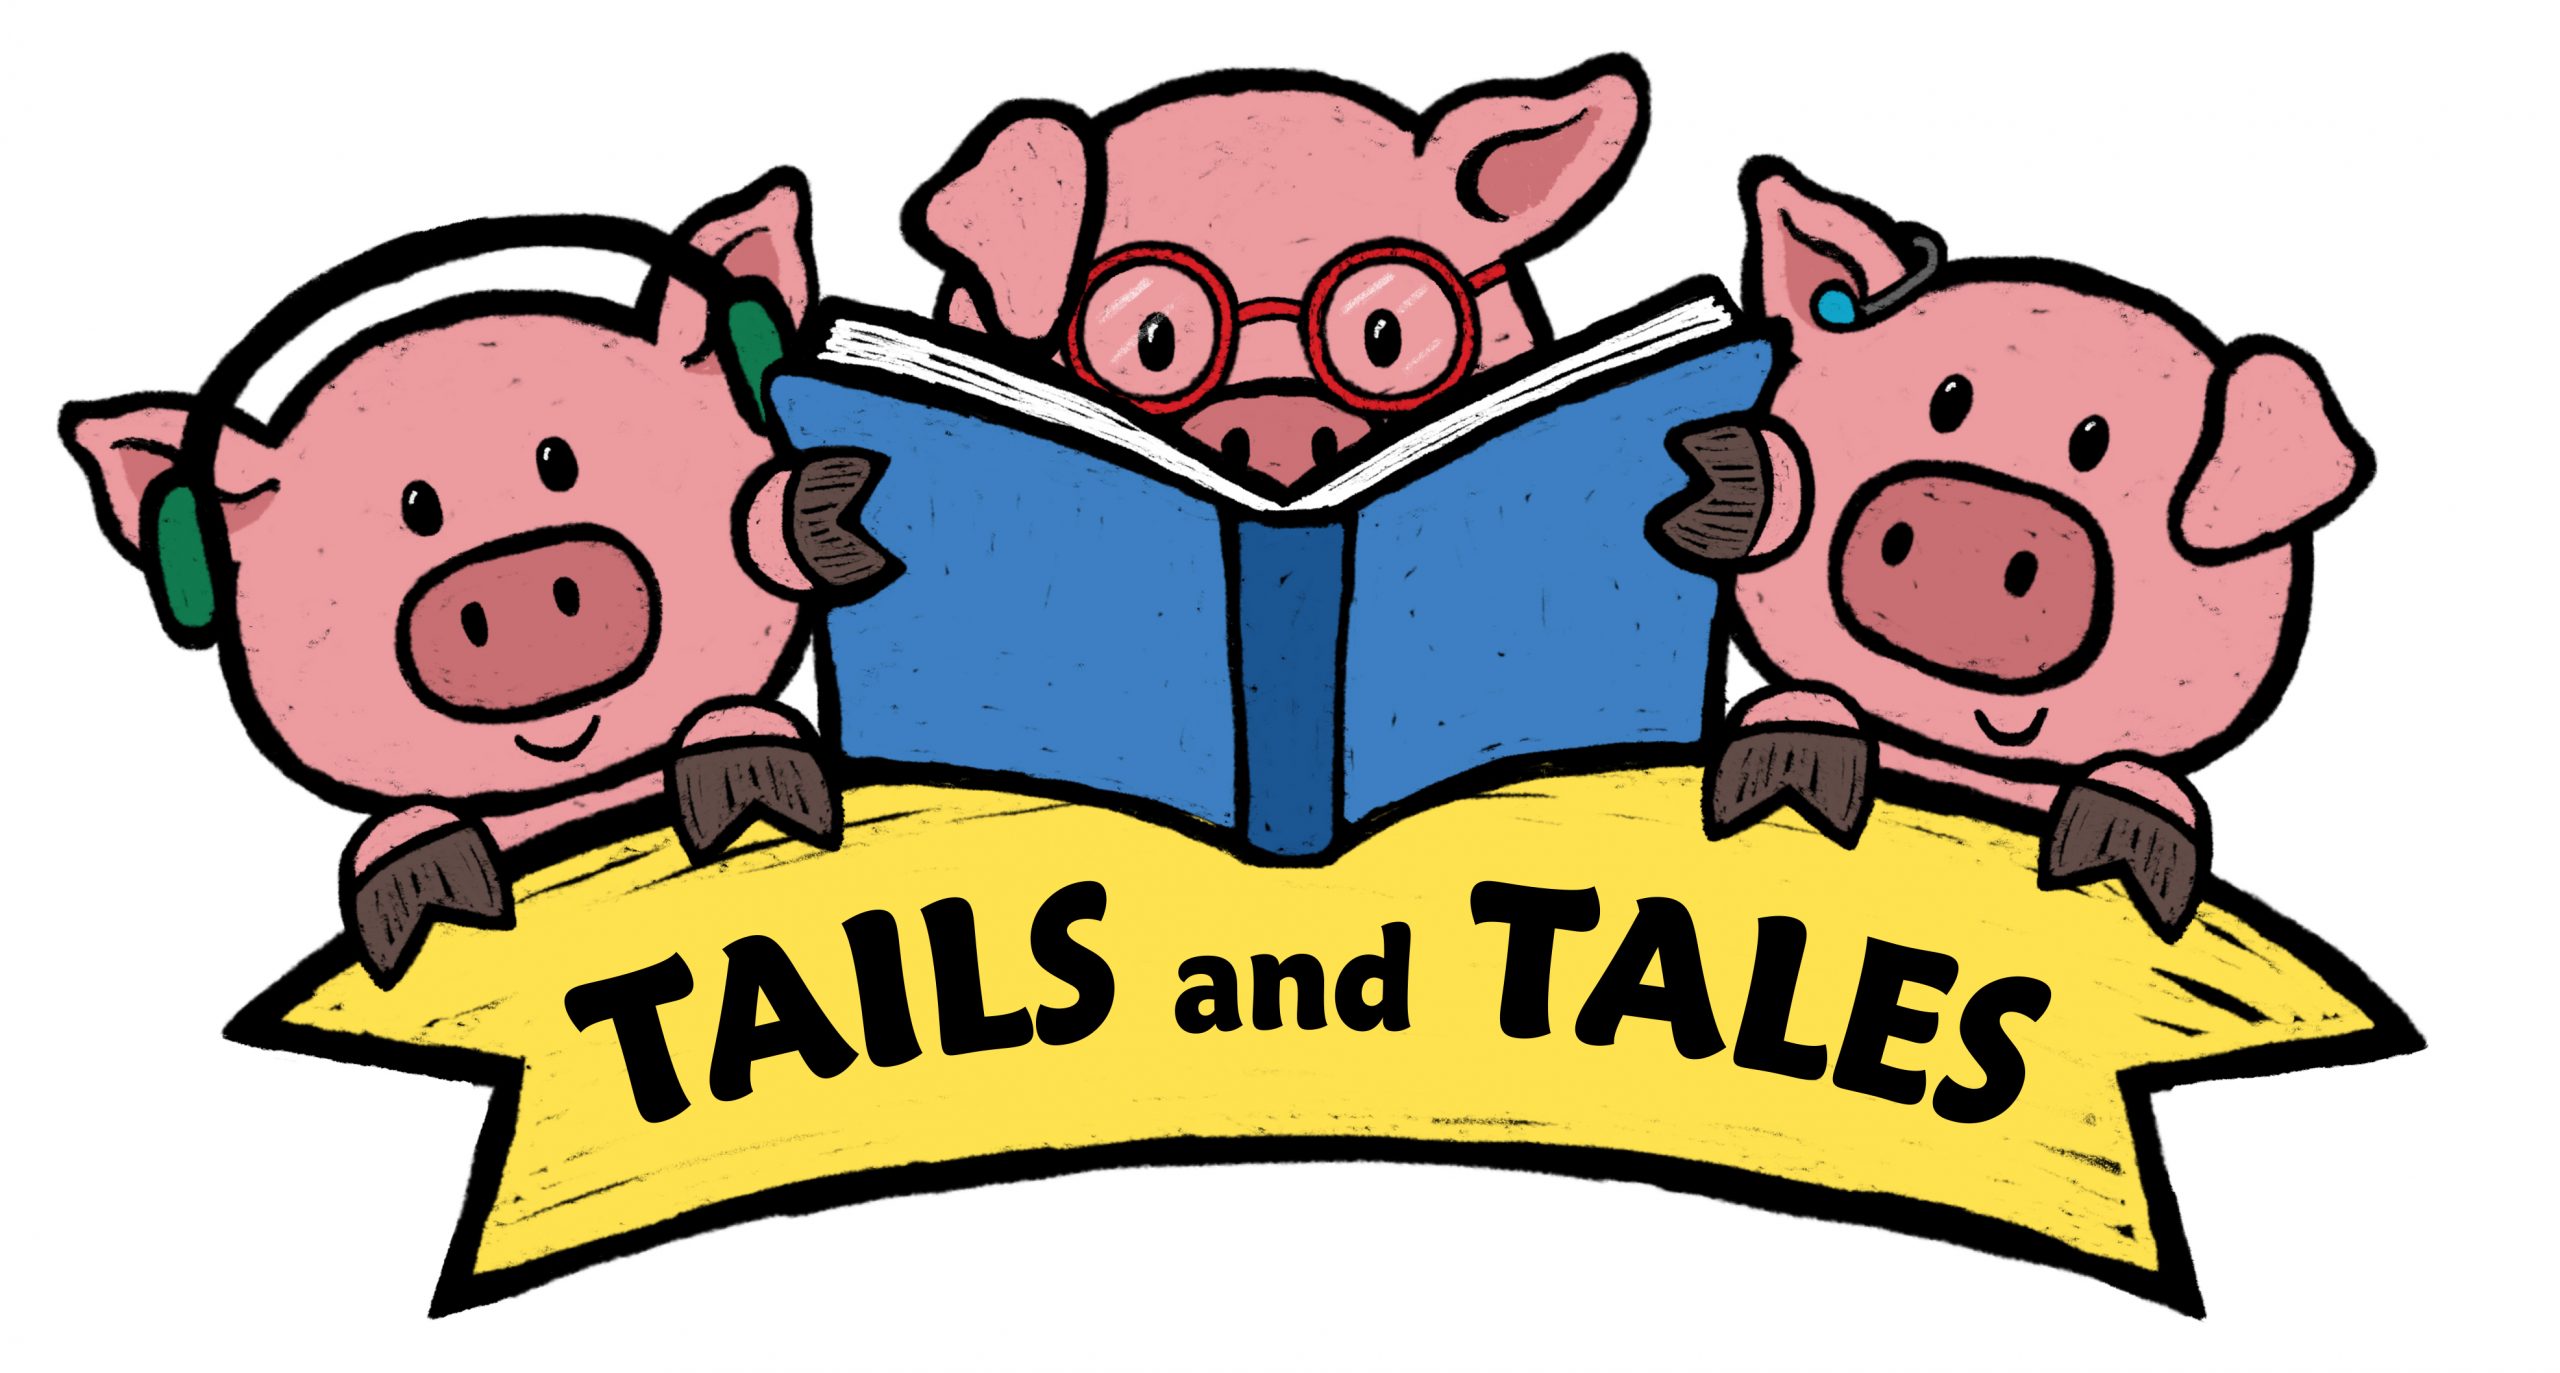 drawing of 3 little pigs behind banner which reads "Tails and Tales"